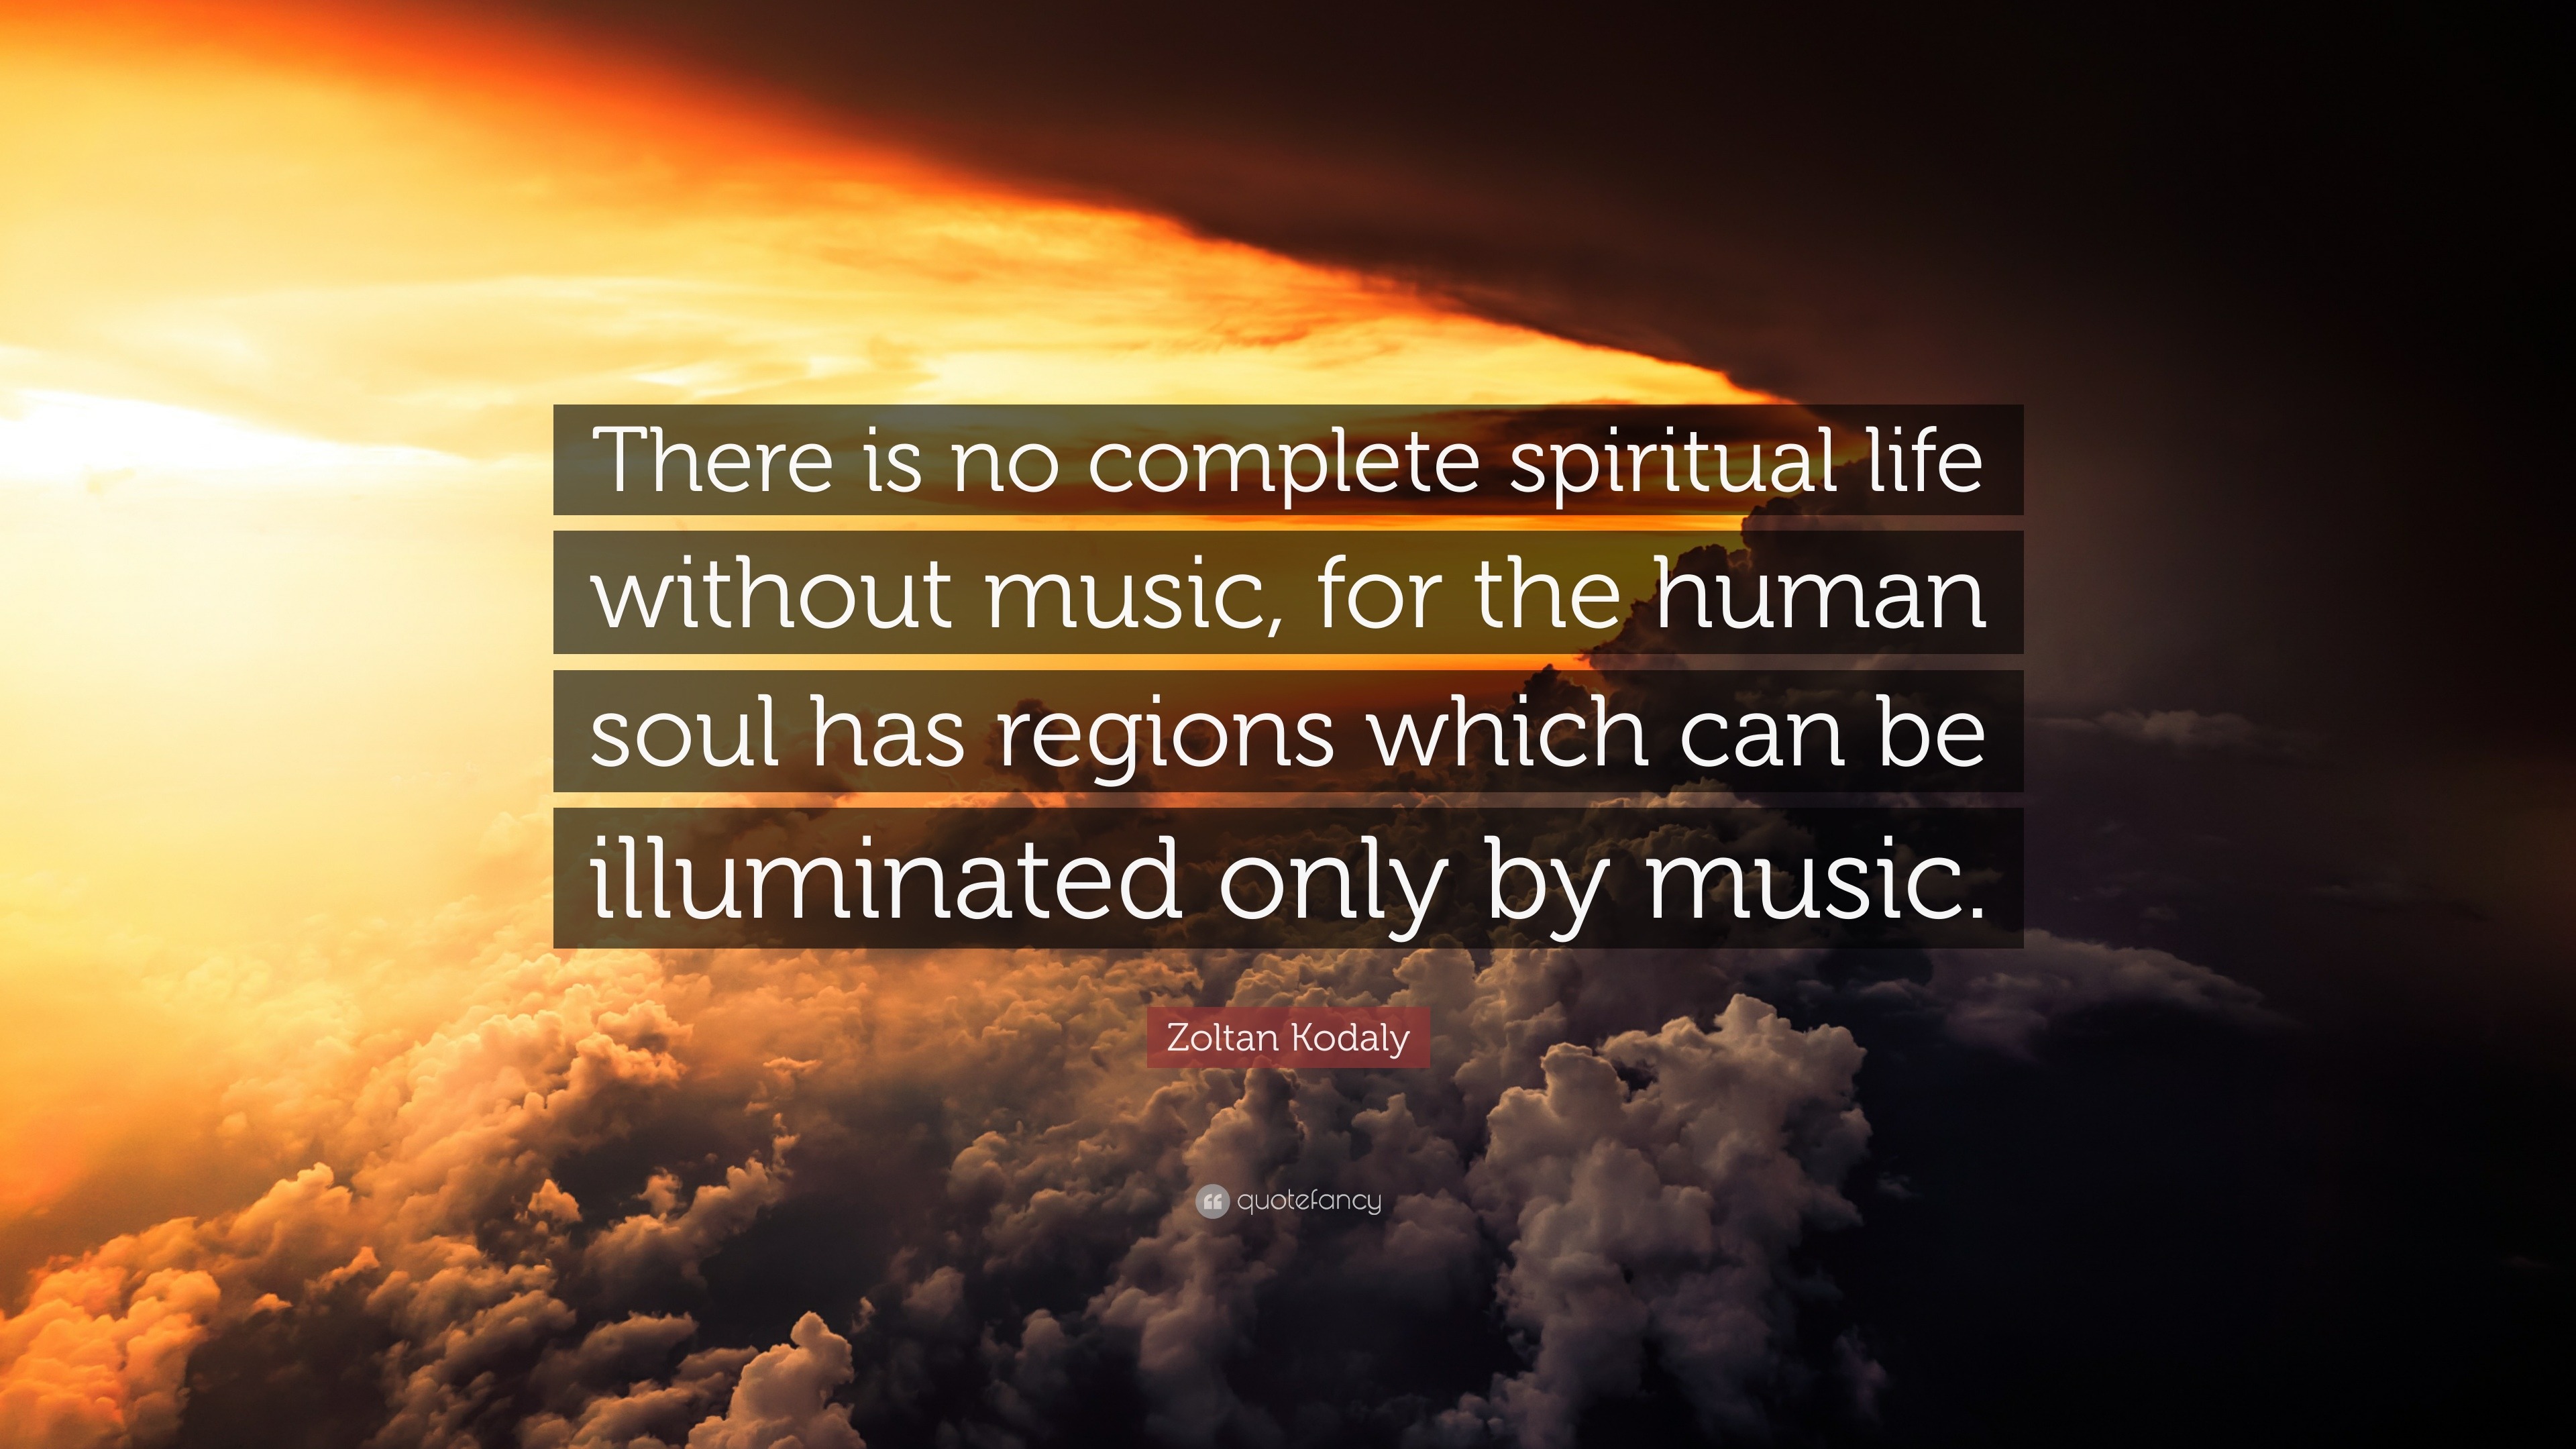 Zoltan Kodaly Quote “There is no plete spiritual life without music for the